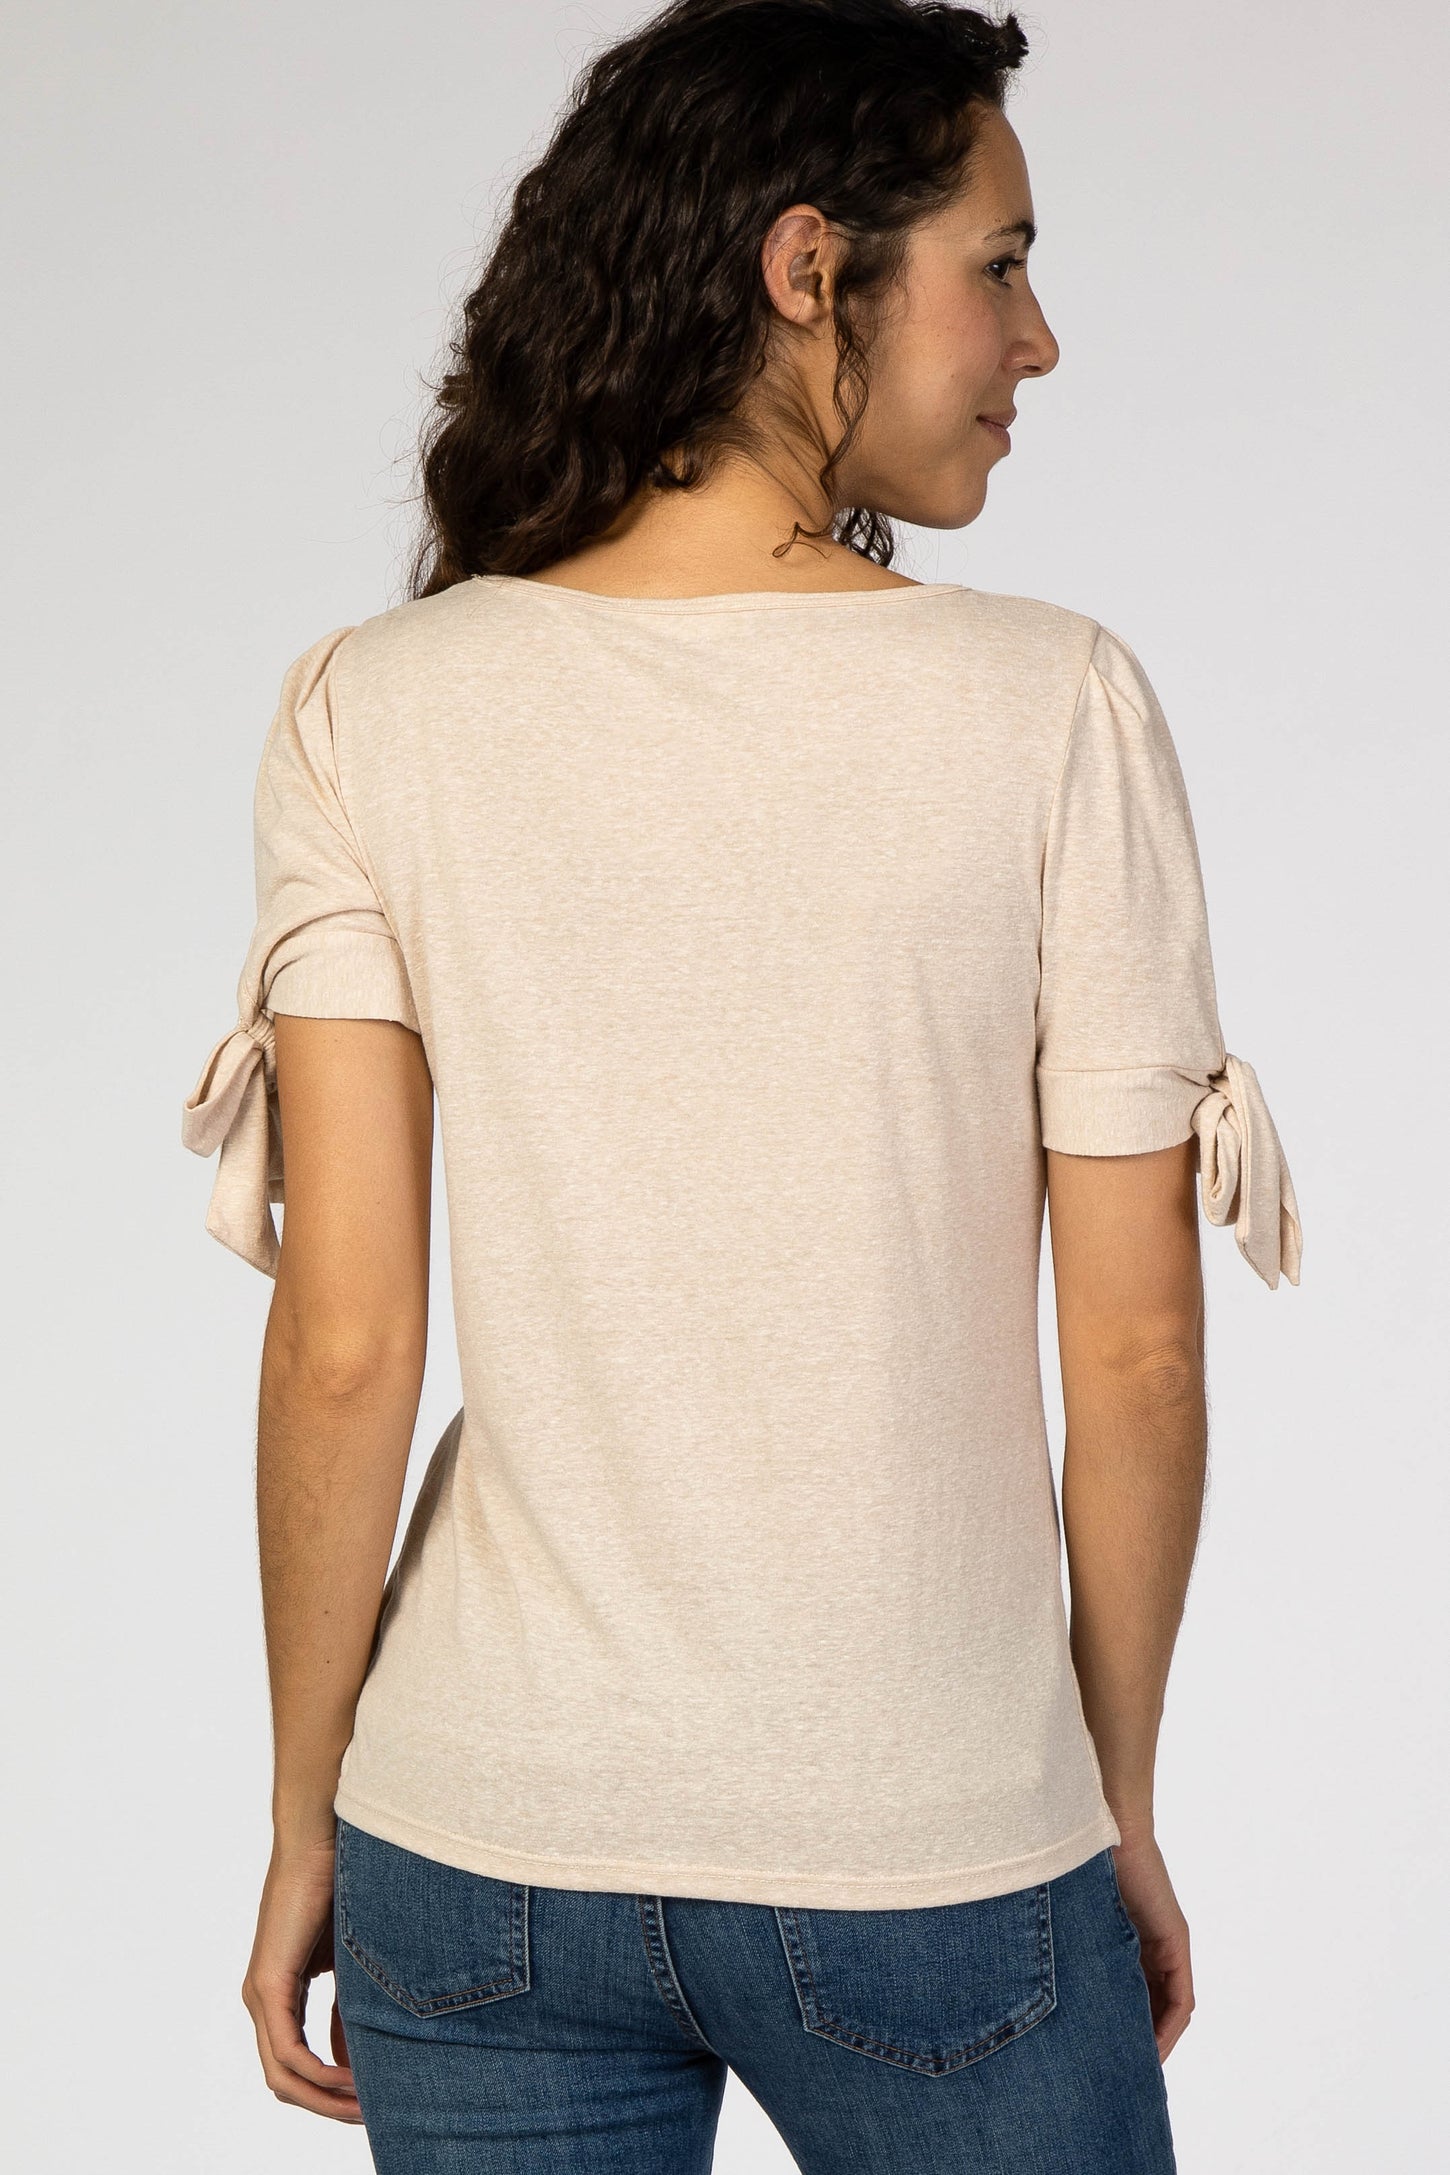 Taupe Short Tie Sleeve Top